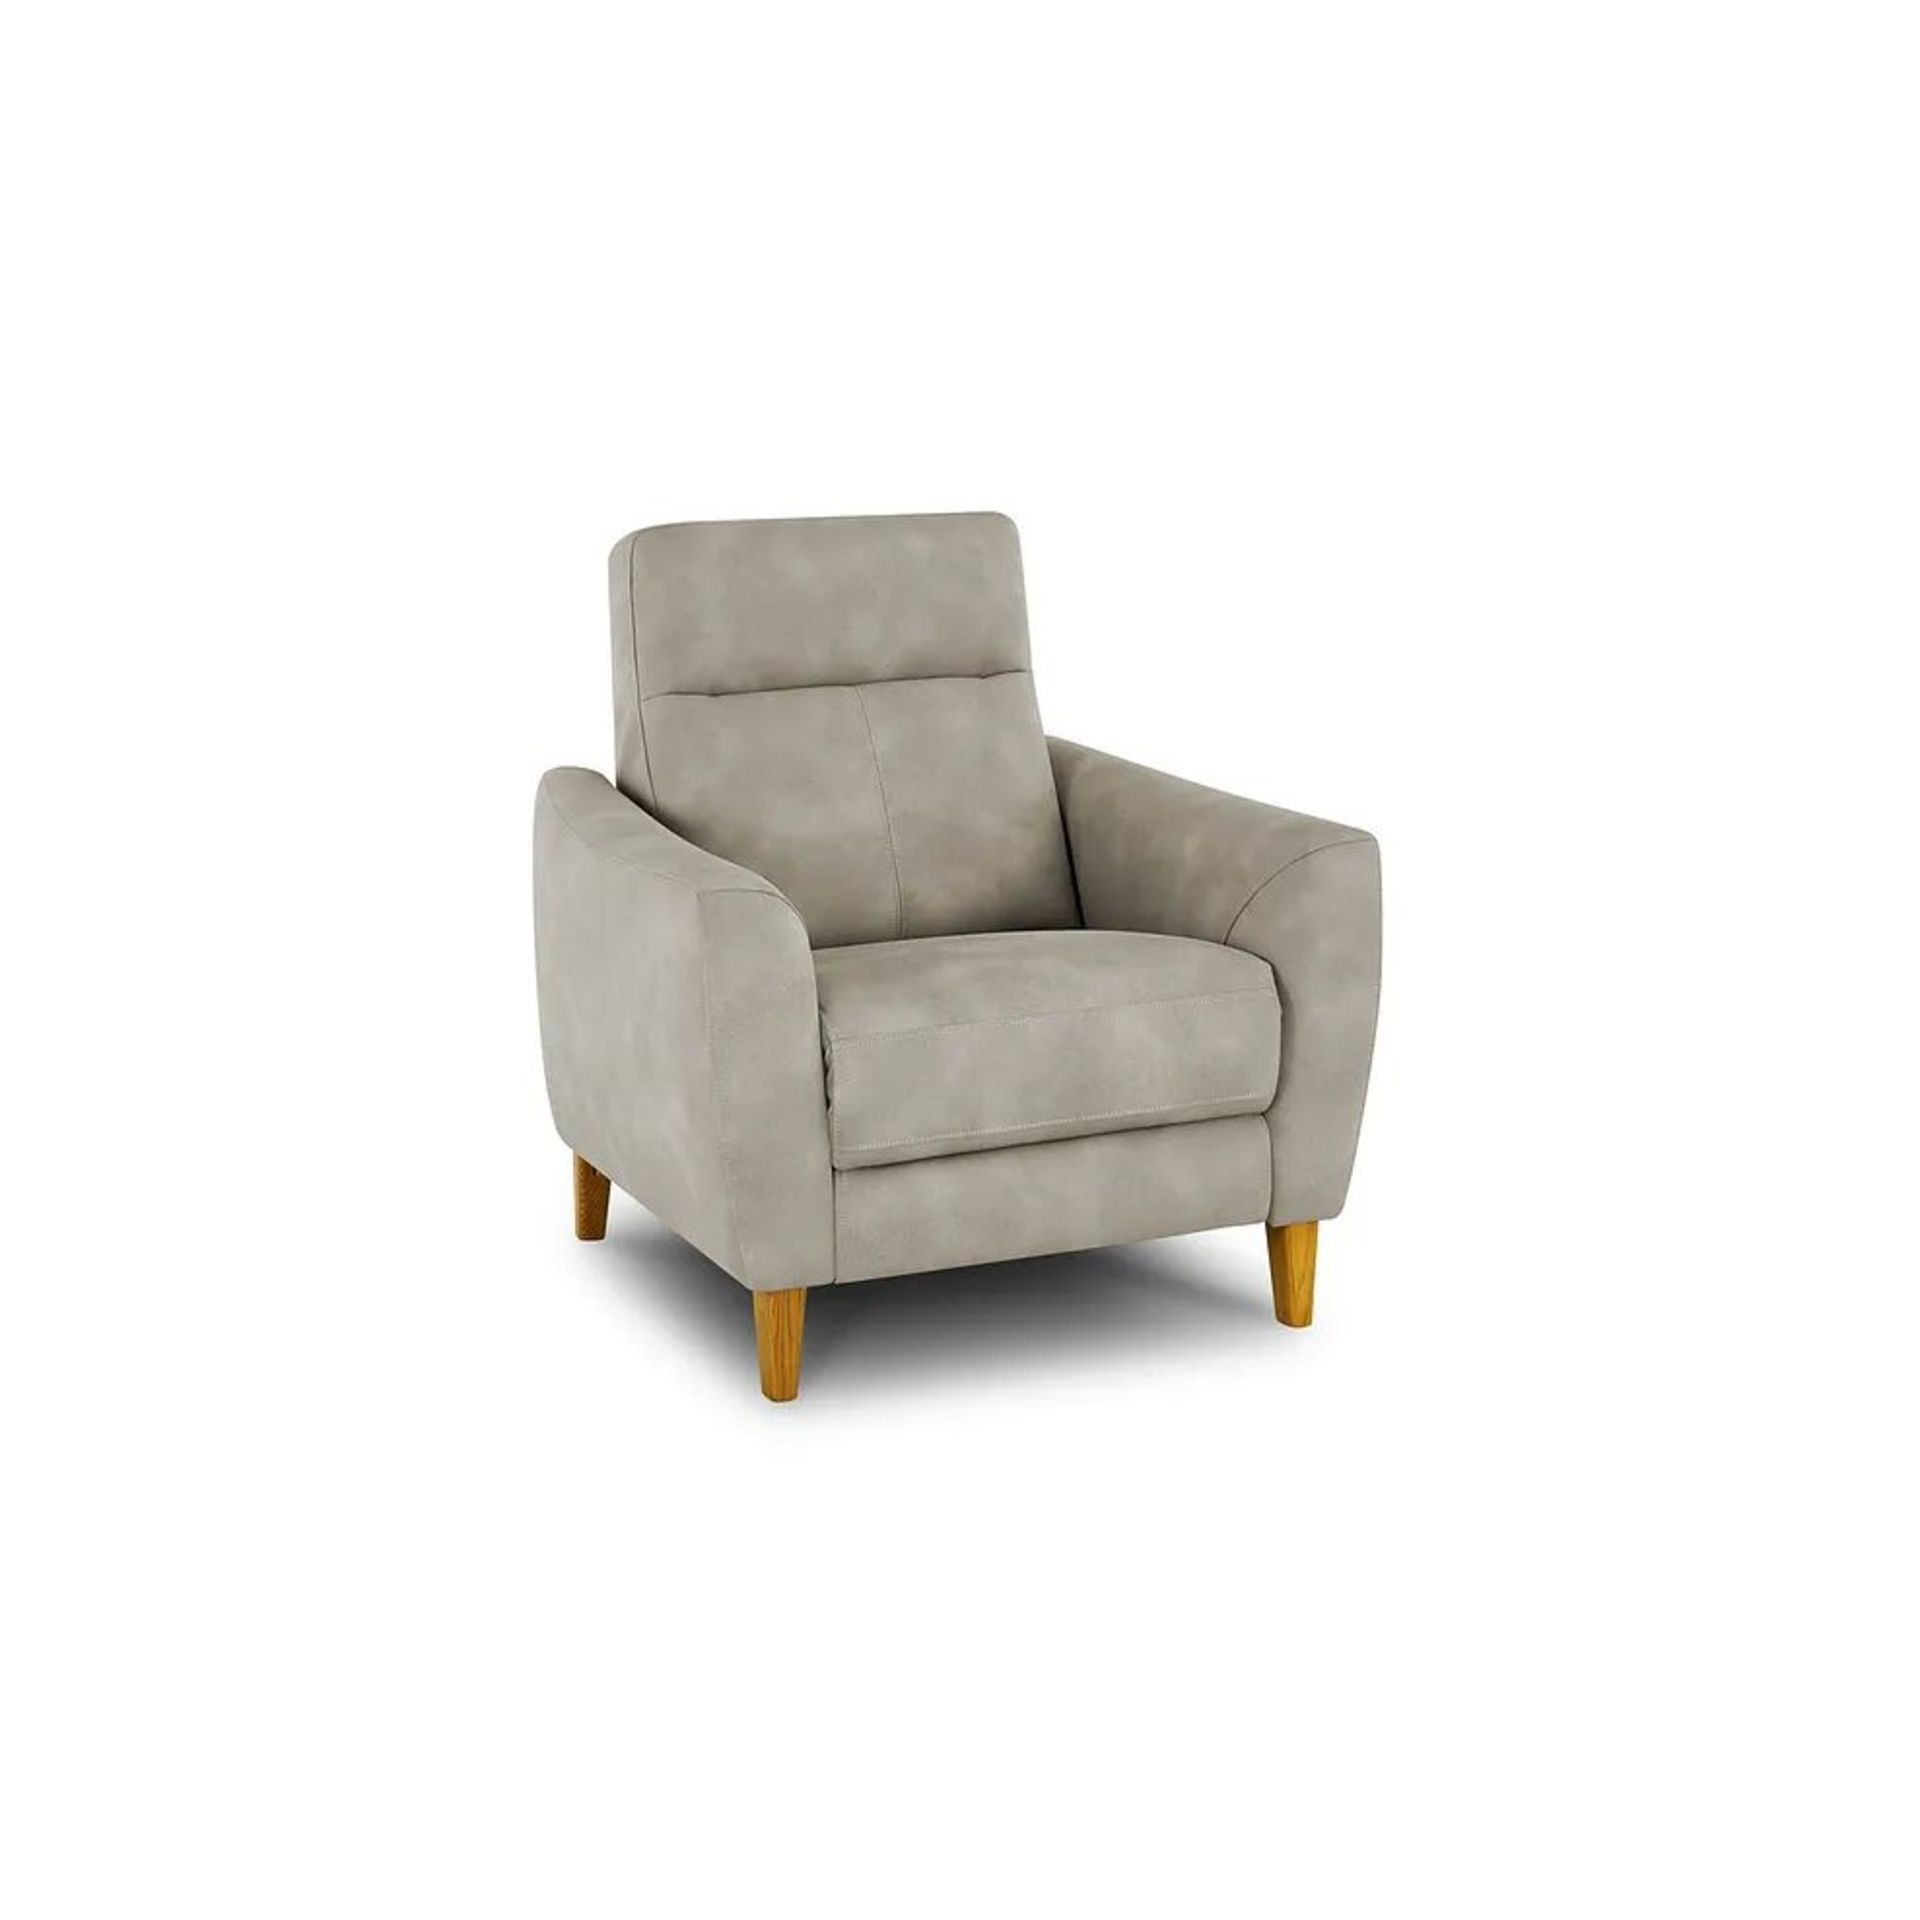 BRAND NEW DYLAN Static Armchair - OXFORD BEIGE FABRIC. RRP £749. Our Dylan armchair, shown here in